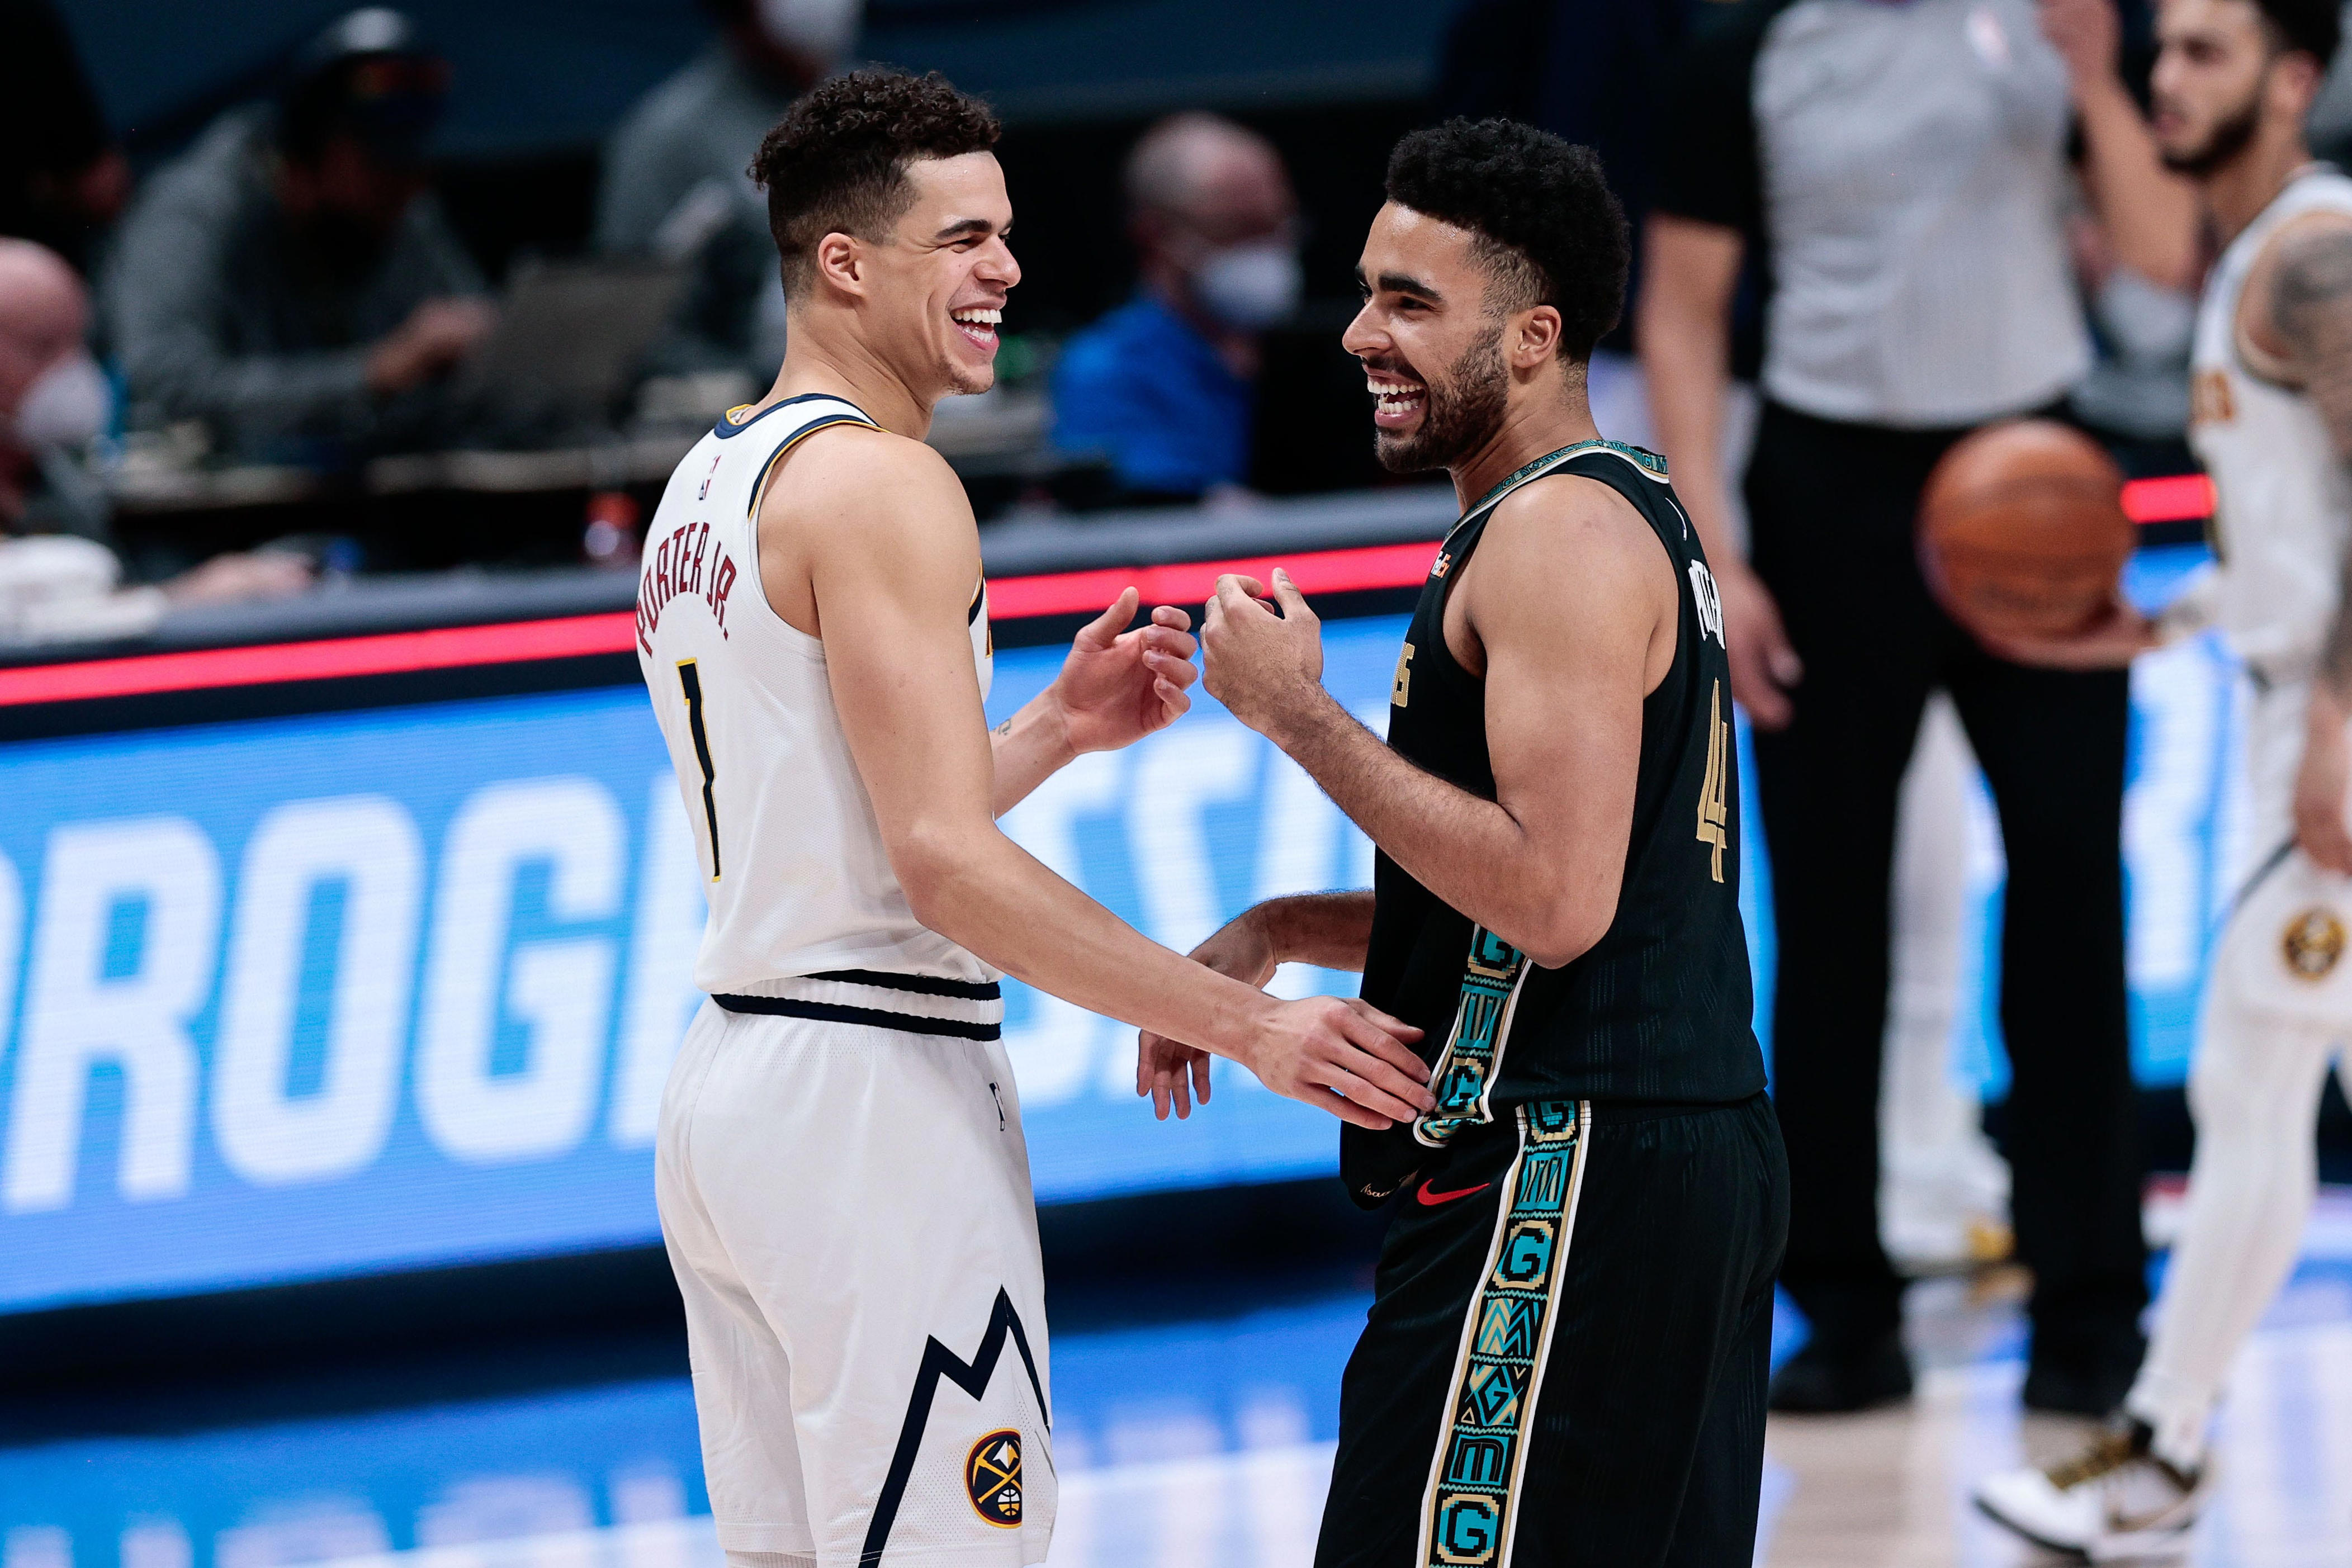 michael porter jr. defends his brother jontay amid reported betting investigation